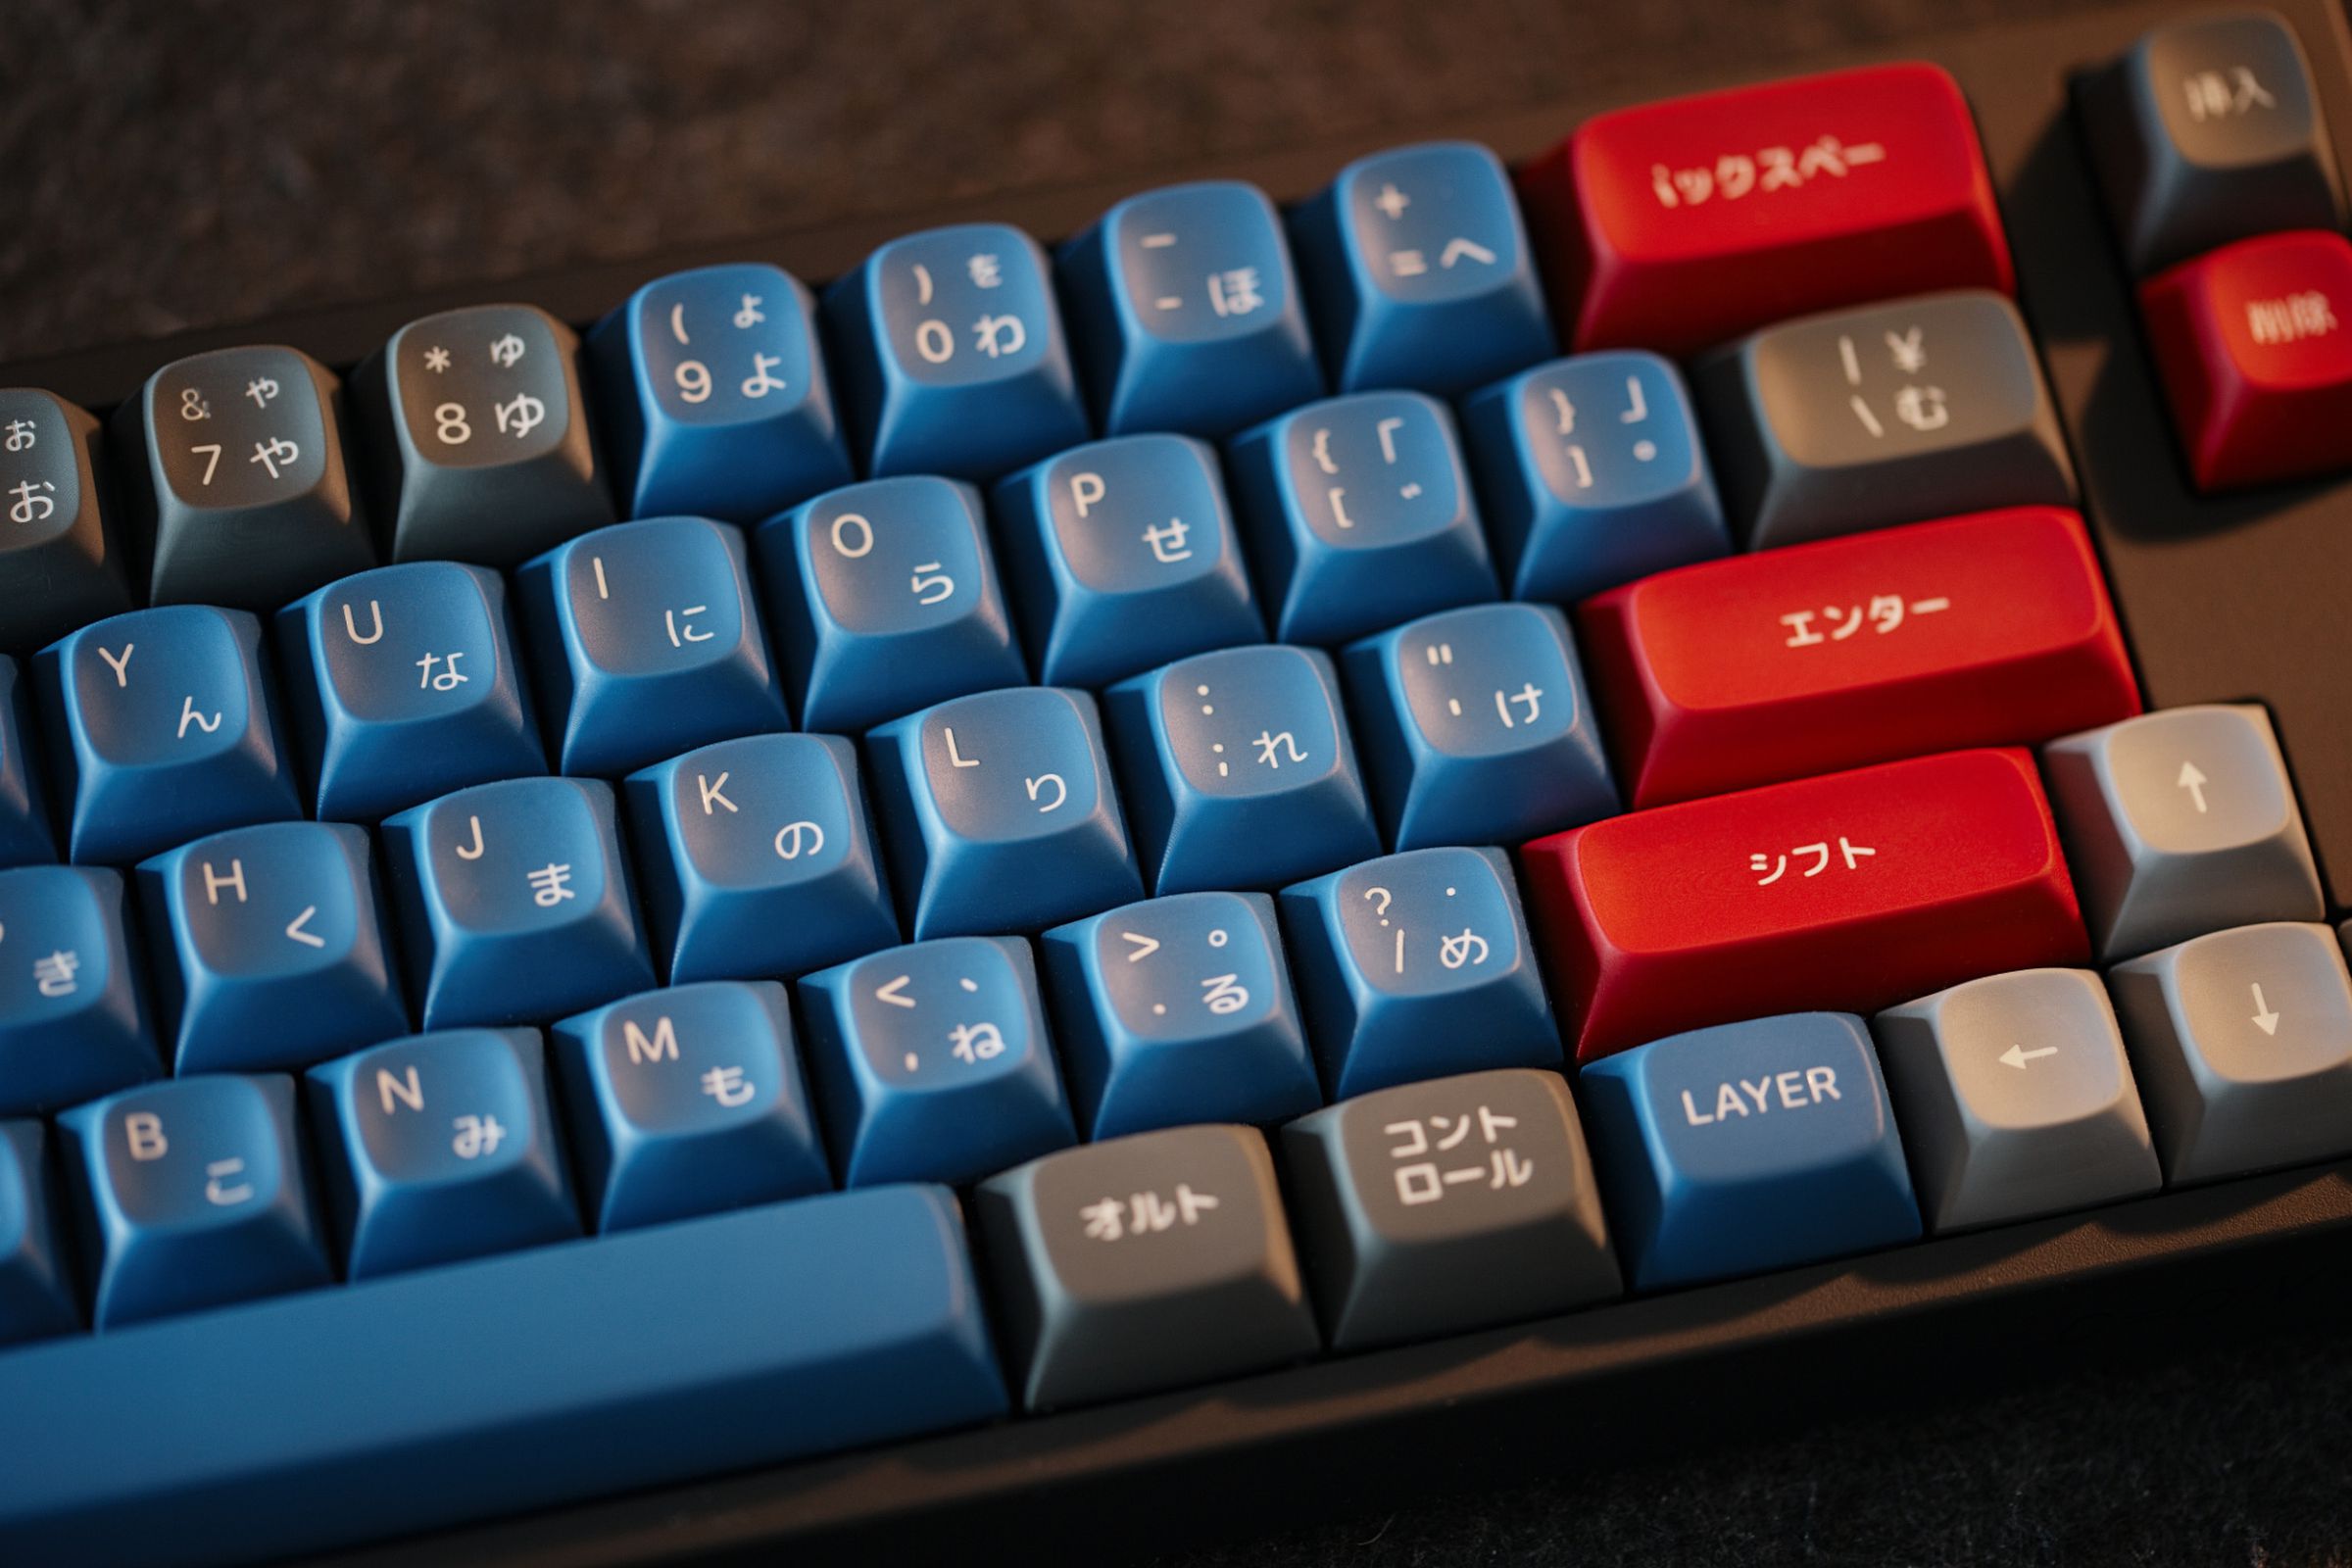 A close-up shot of a keyboard with blue alpha keys, a mixture of red and grey modifiers, and lighter grey arrow keys. The legends are a mix of Latin and Japanese characters.